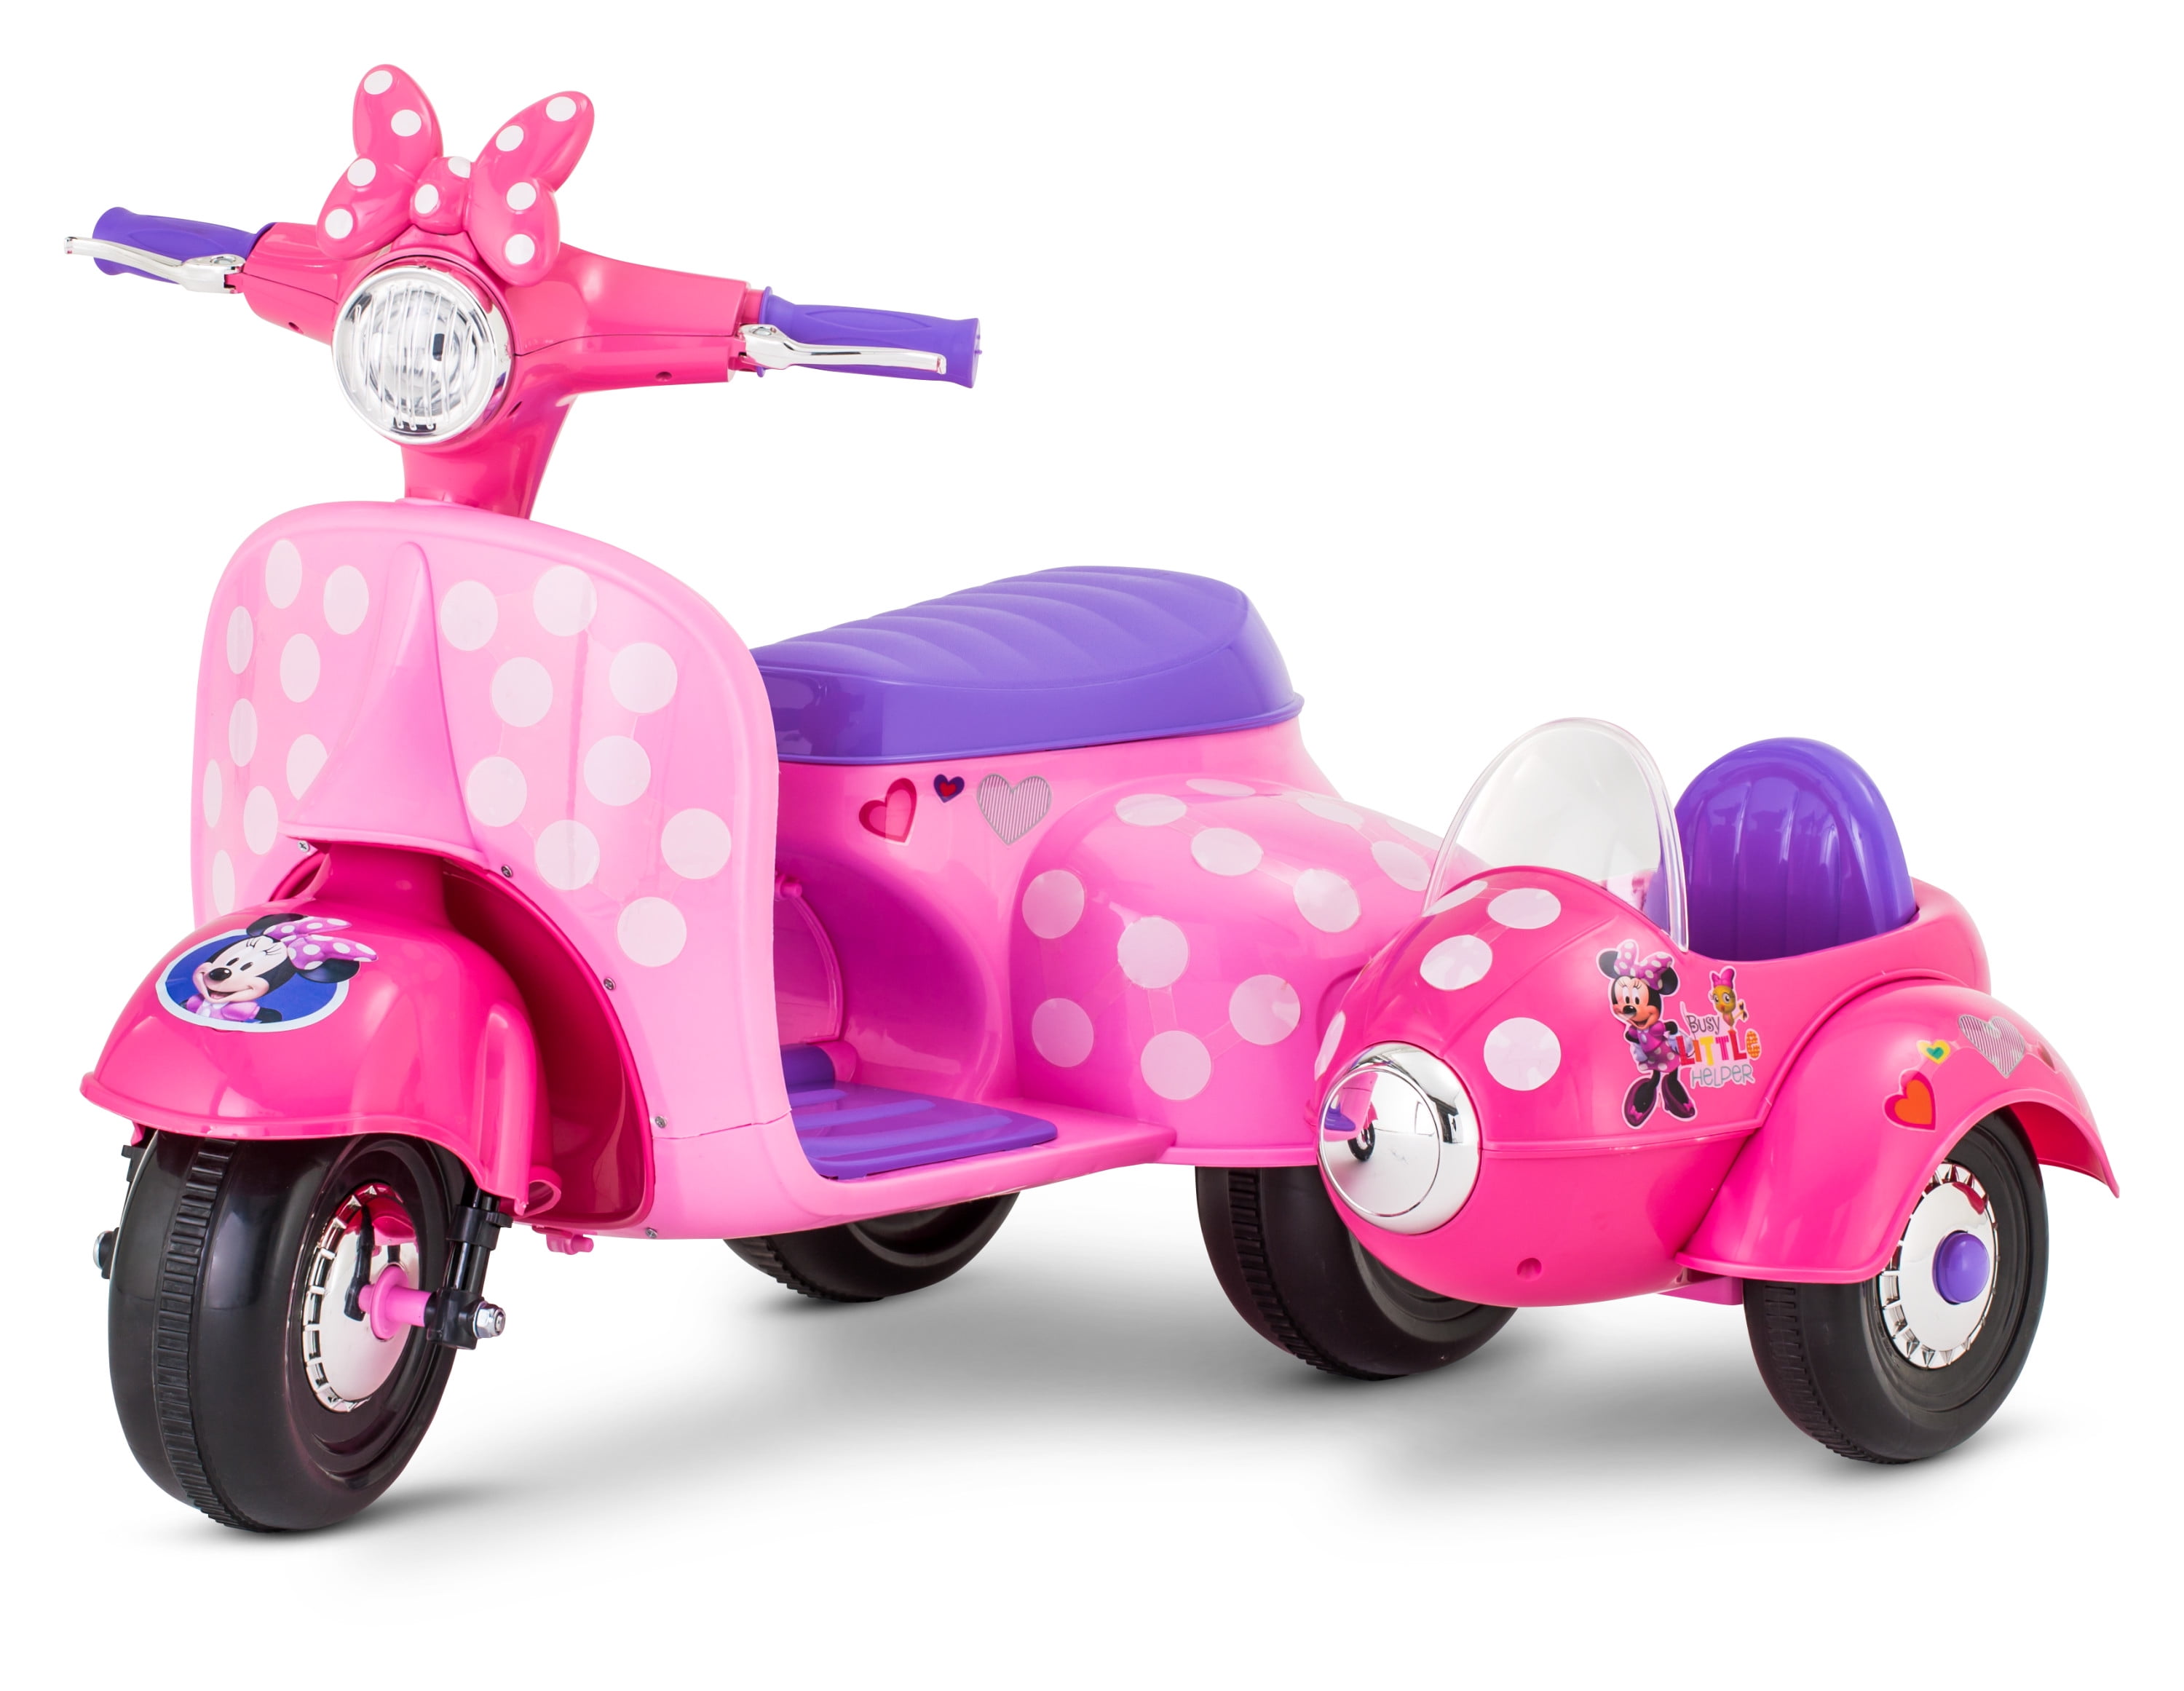 6 volt minnie mouse scooter with sidecar